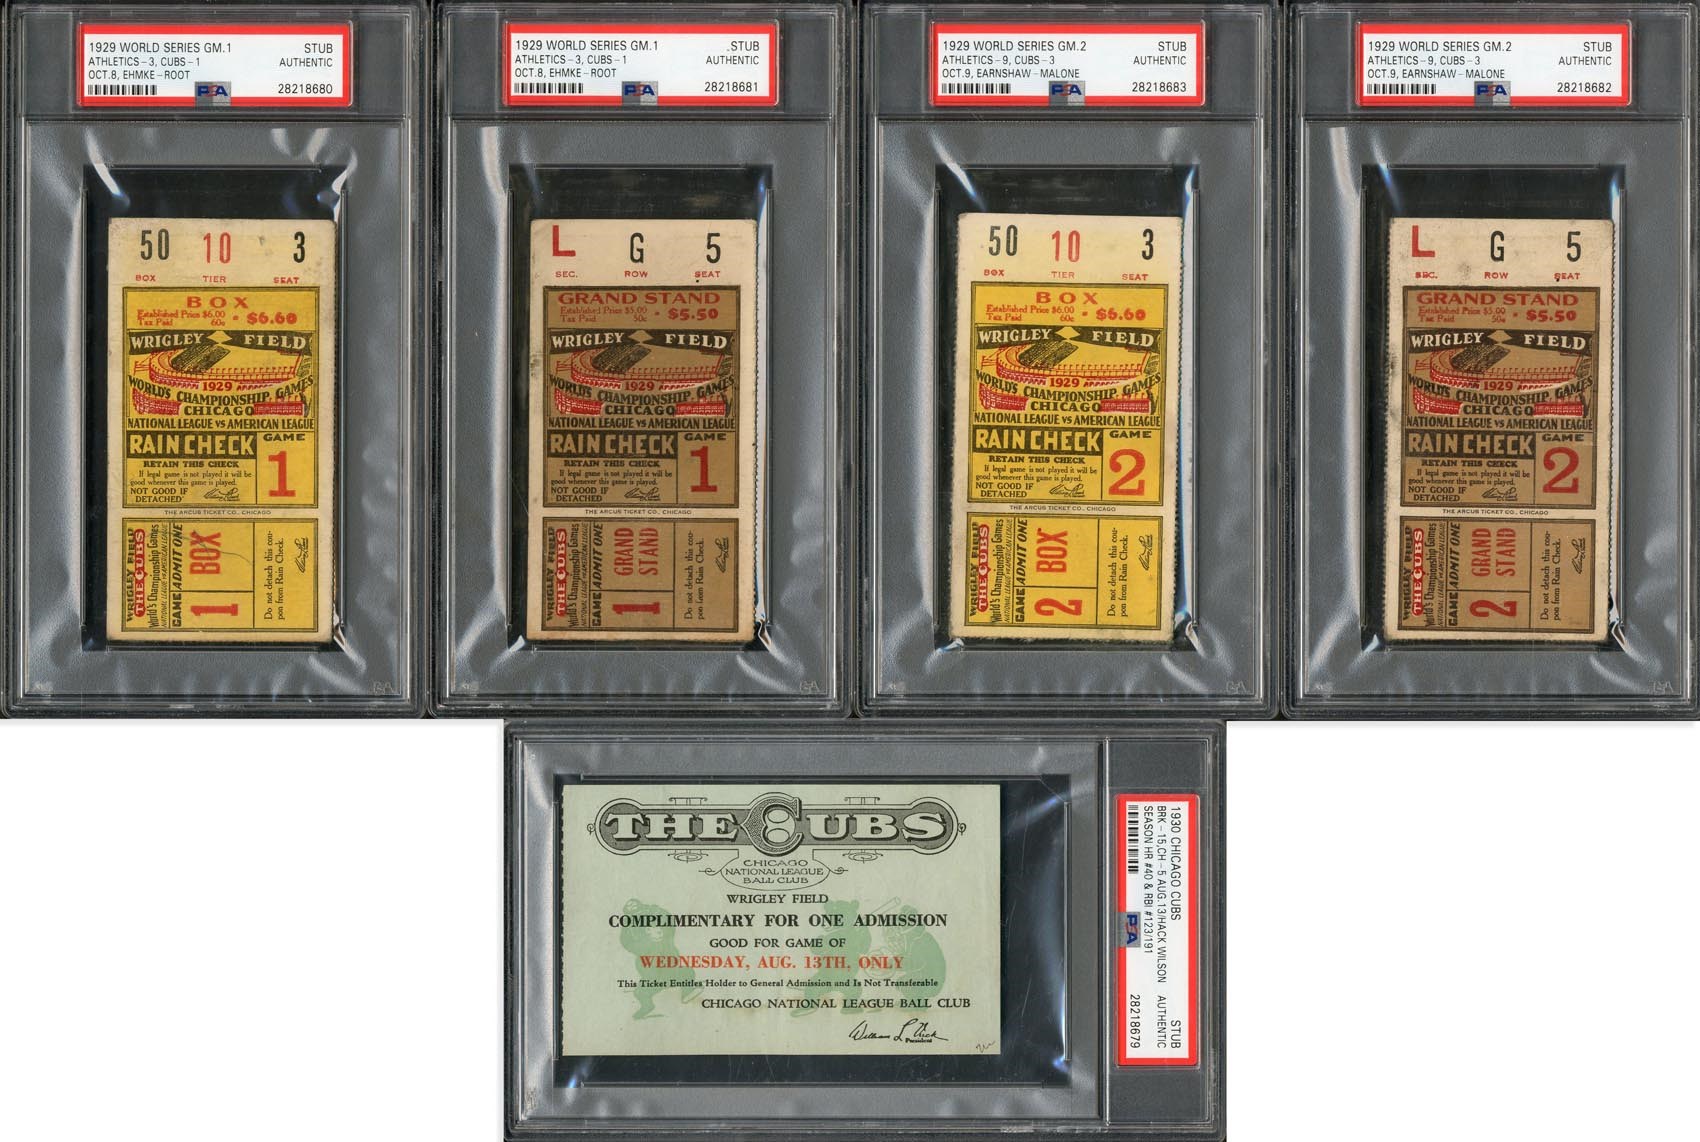 1929 Cubs World Series Ticket Stub Collection (5)